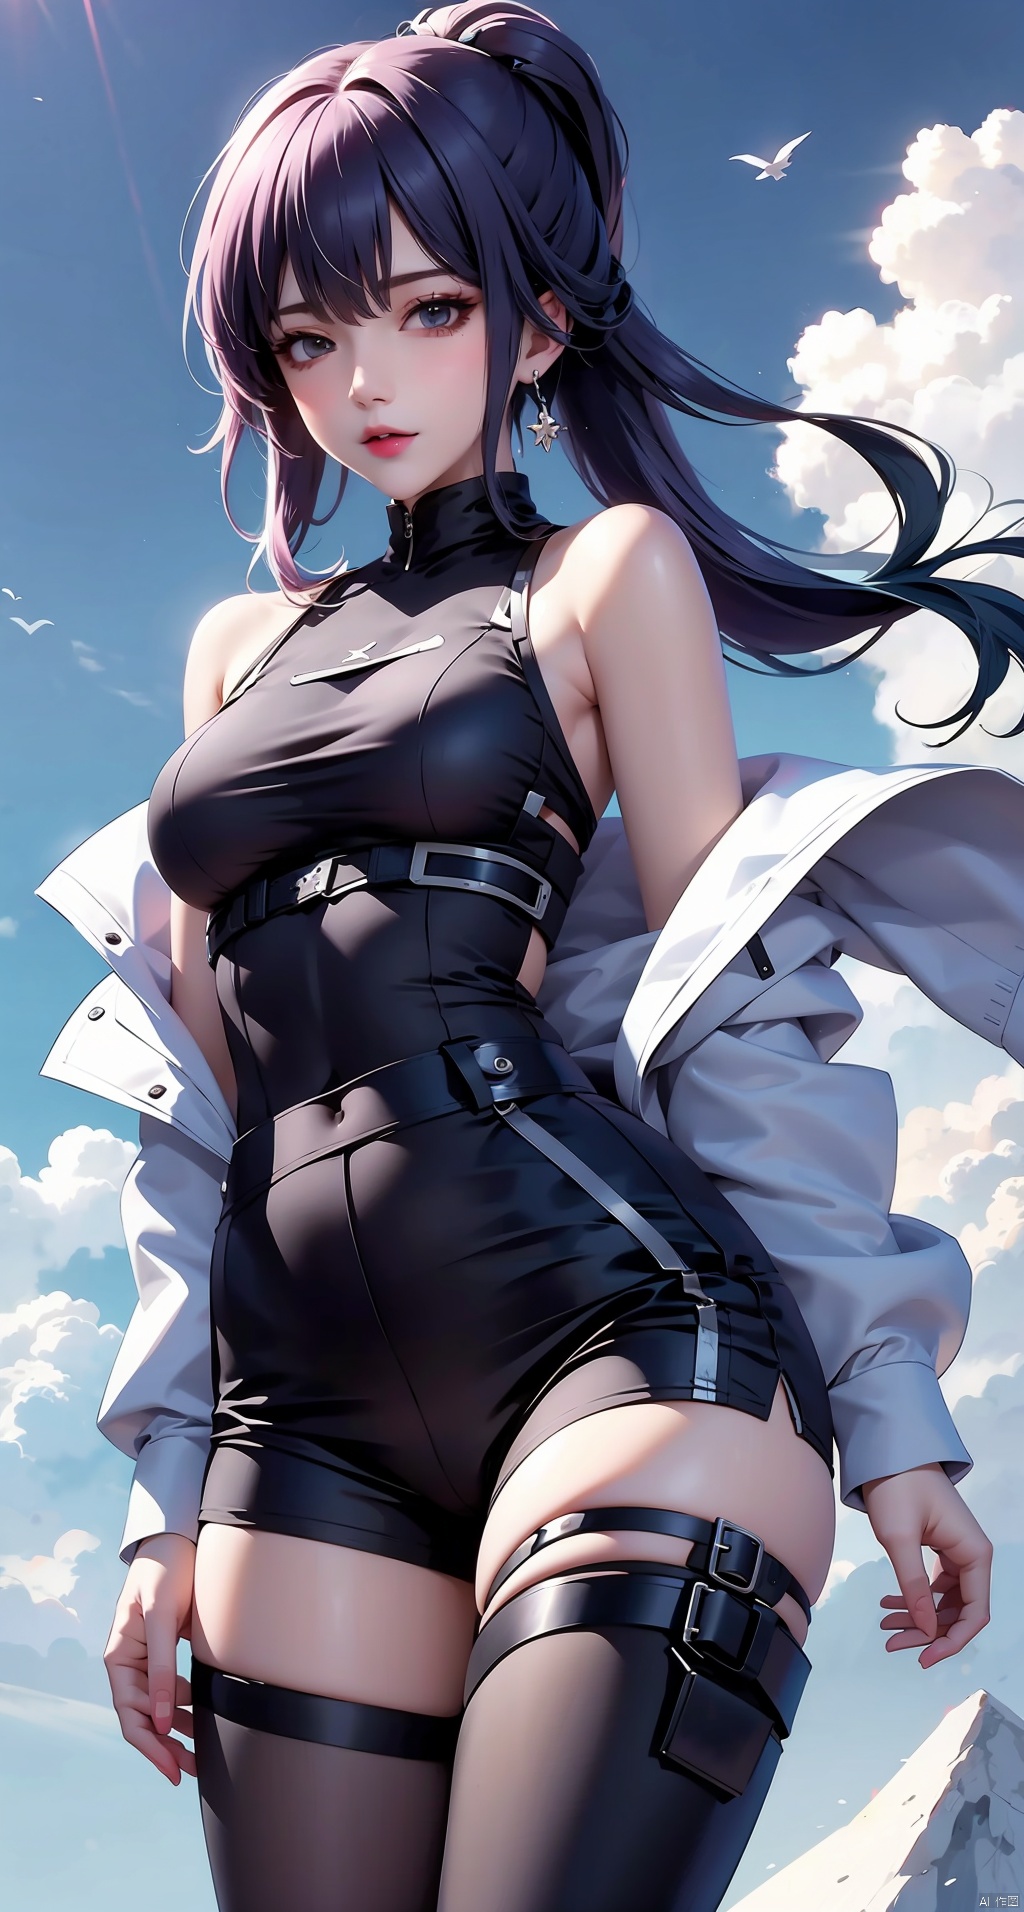  1 girl,In the sky,Tight pants,Parachute,jacket sky,thigh holster,thigh strap,